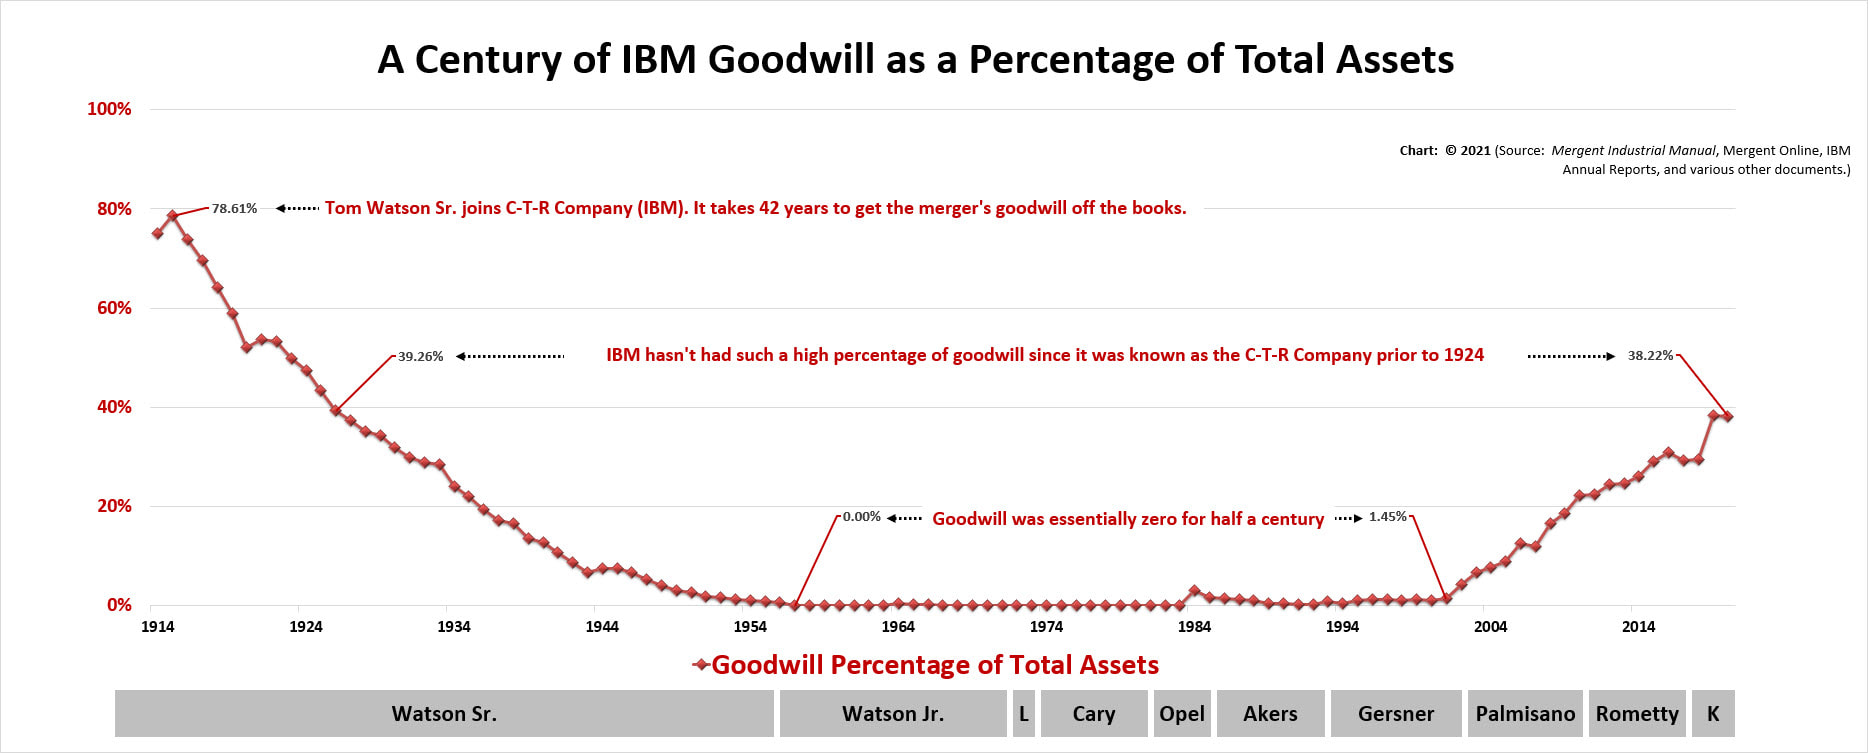 A color line chart showing the 100+ year history of IBM's goodwill + intangible assets as a percentage of its total assets by IBM CEO: Watson Sr., Watson Jr., Learson, Cary, Opel, Akers, Gerstner, Palmisano, Rometty and Krishna.